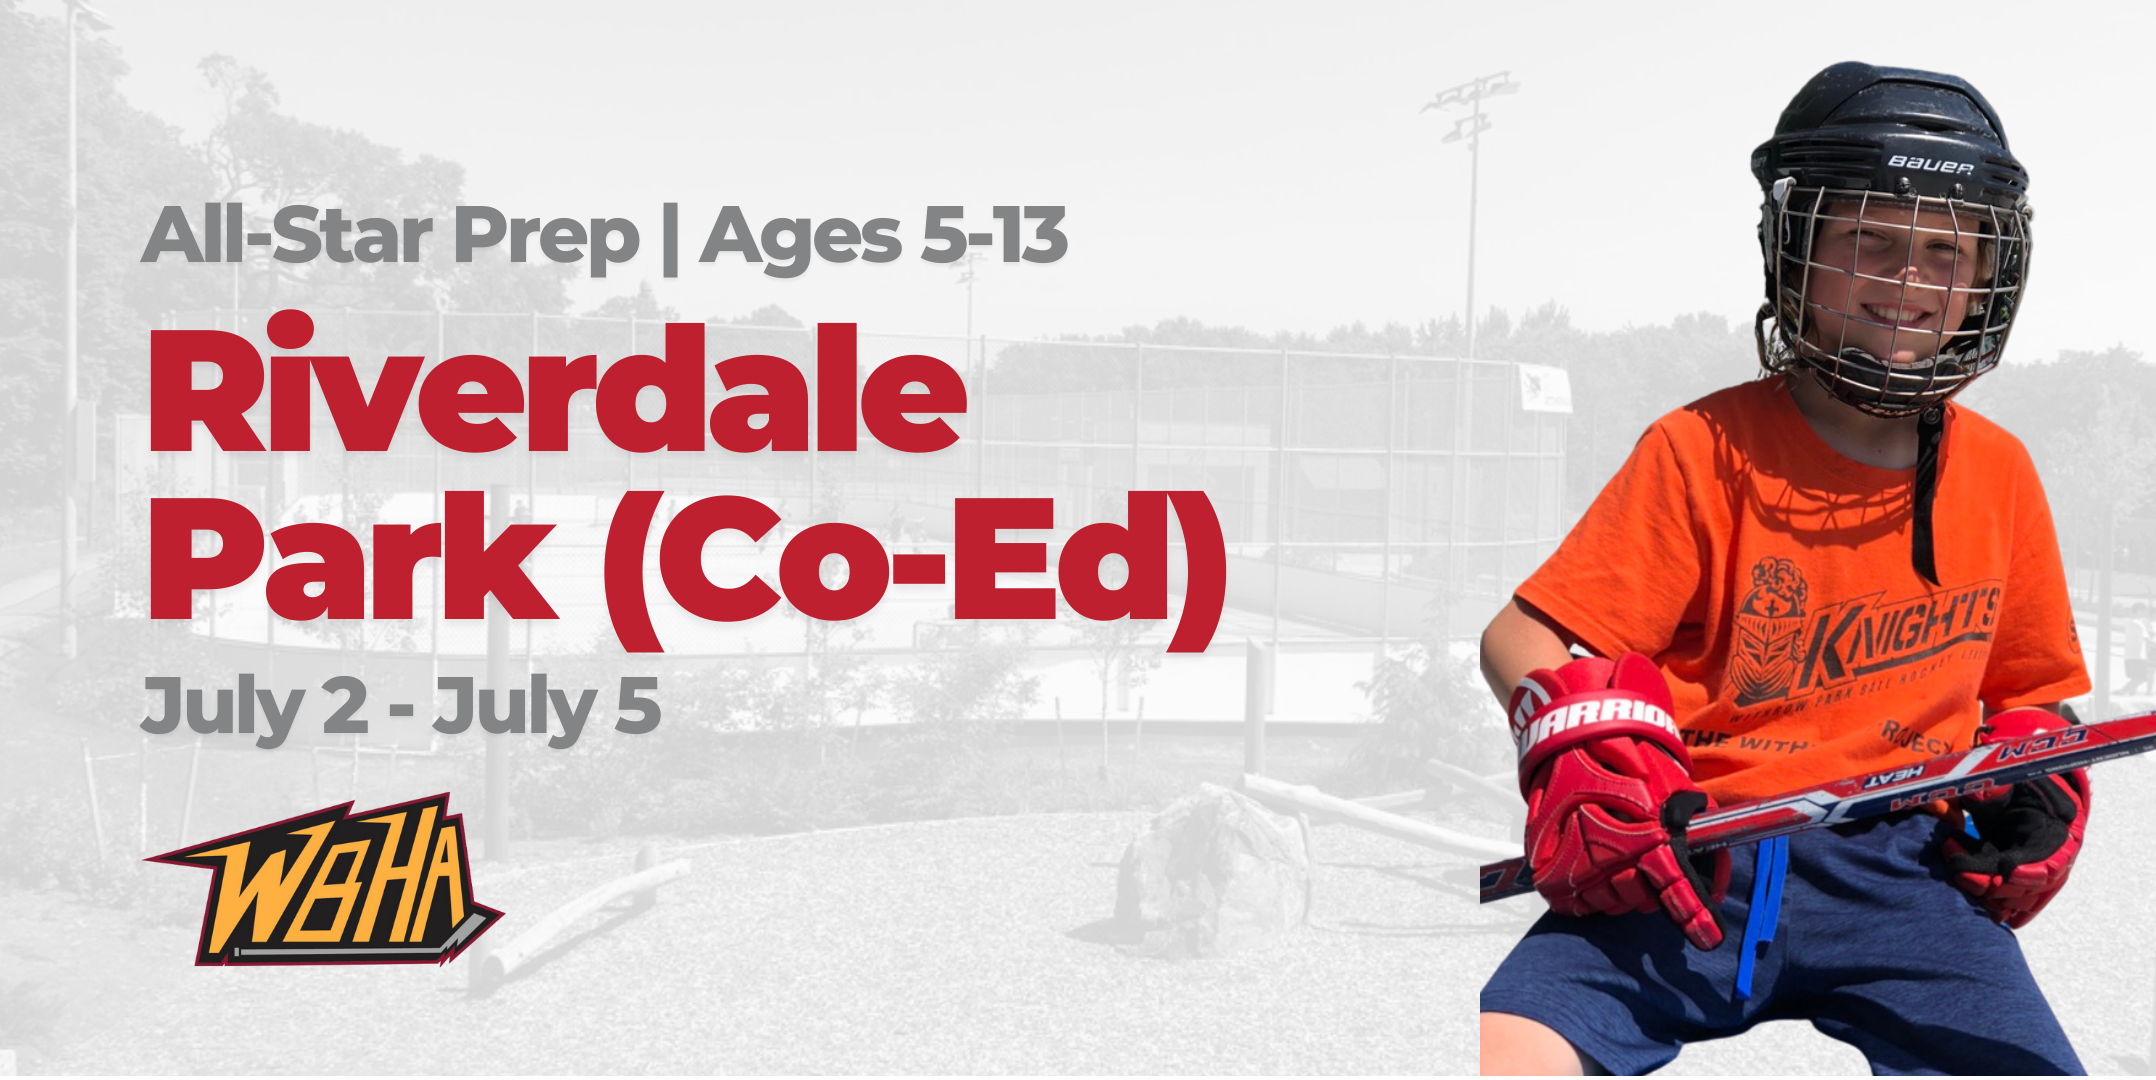 Riverdale Park | Co-Ed | All-Star Prep | July 2 to July 5